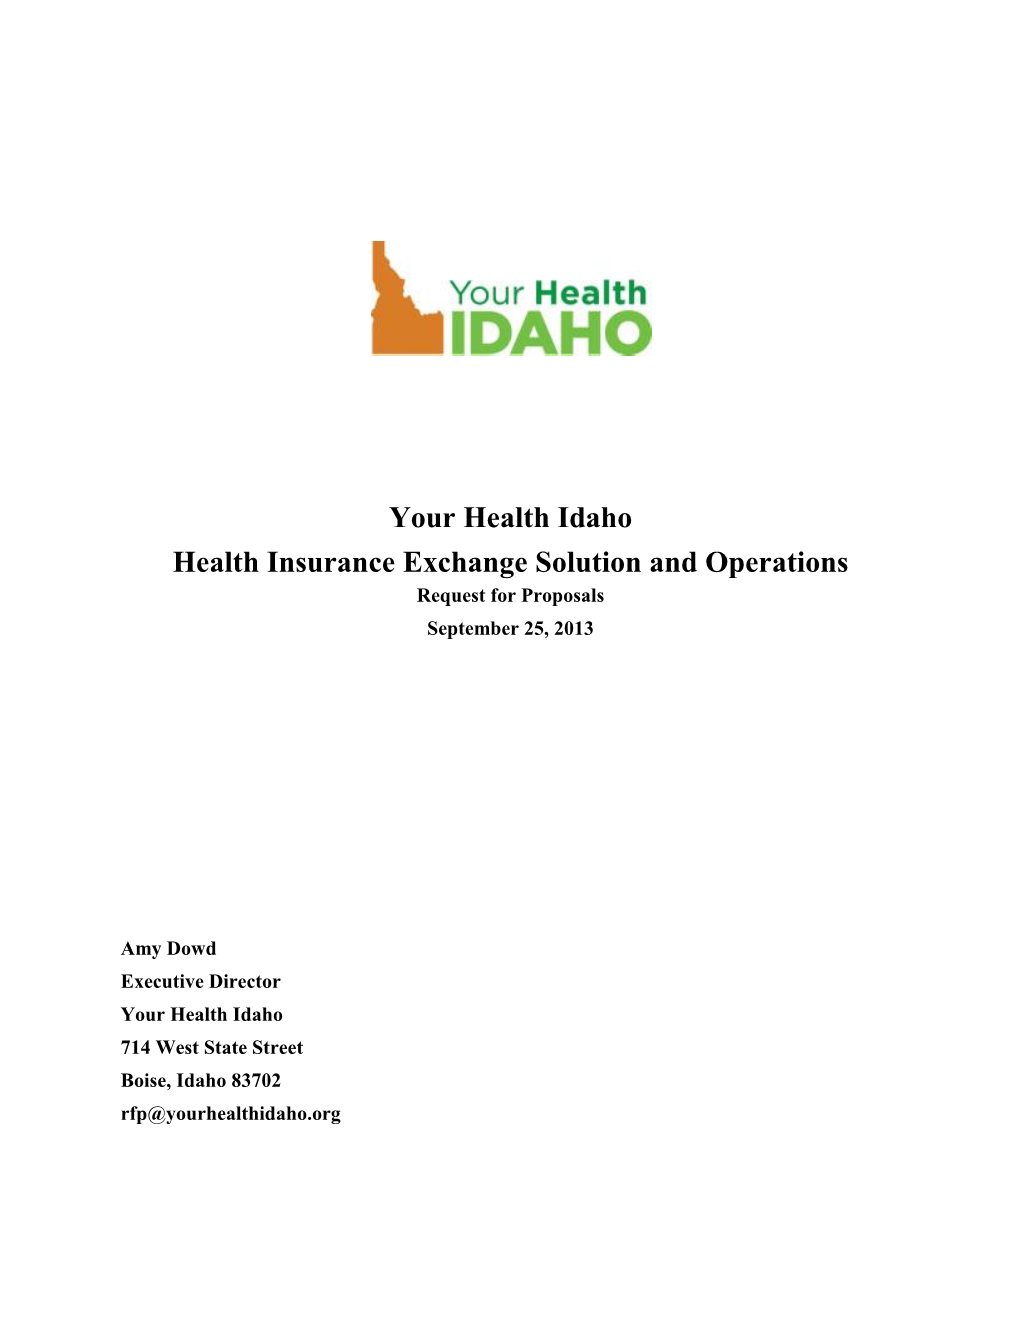 Your Health Idaho Health Insurance Exchange Solution and Operations Request for Proposals September 25, 2013